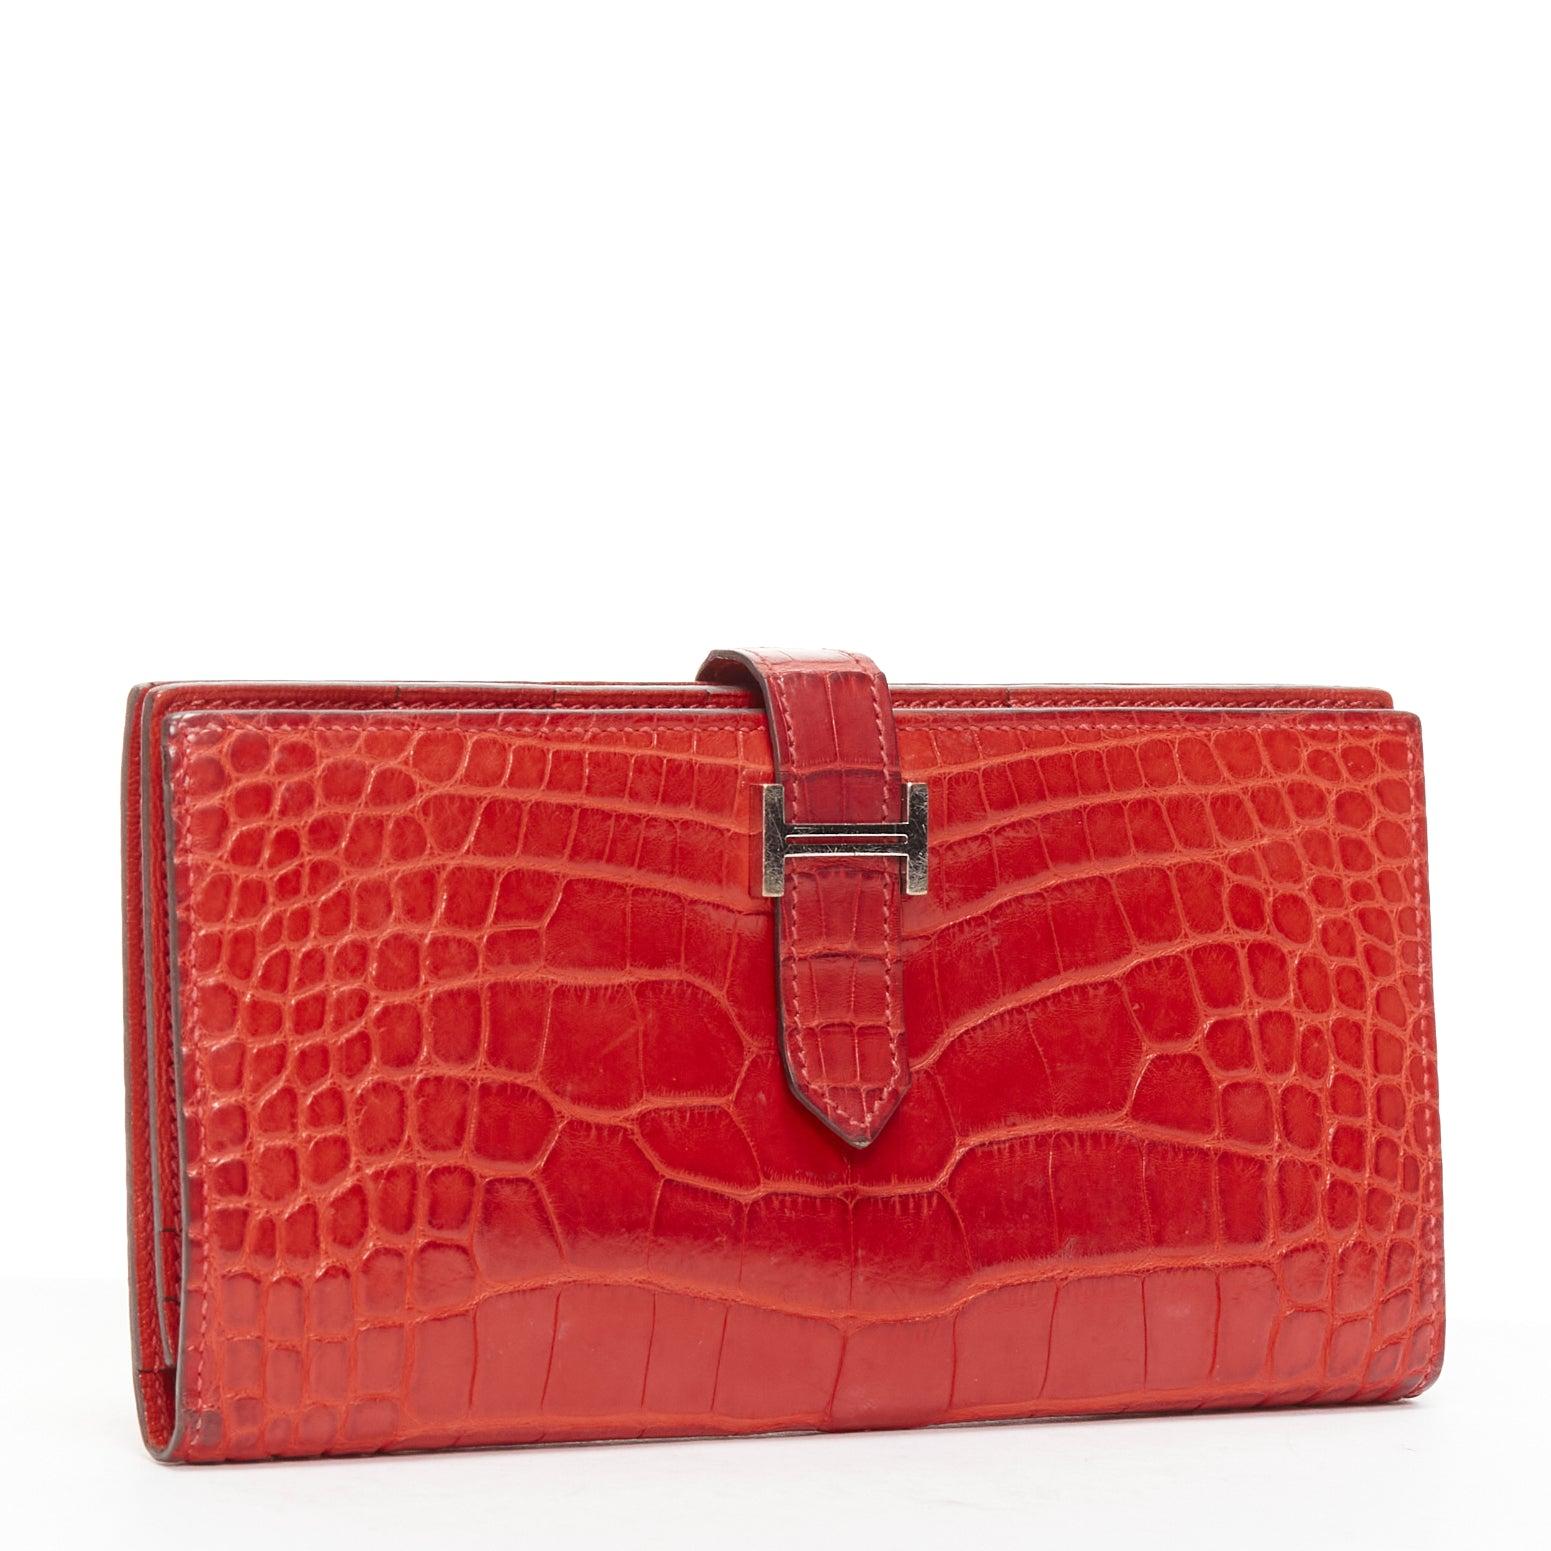 HERMES Bearne red scaled leather silver H logo long wallet For Sale 5